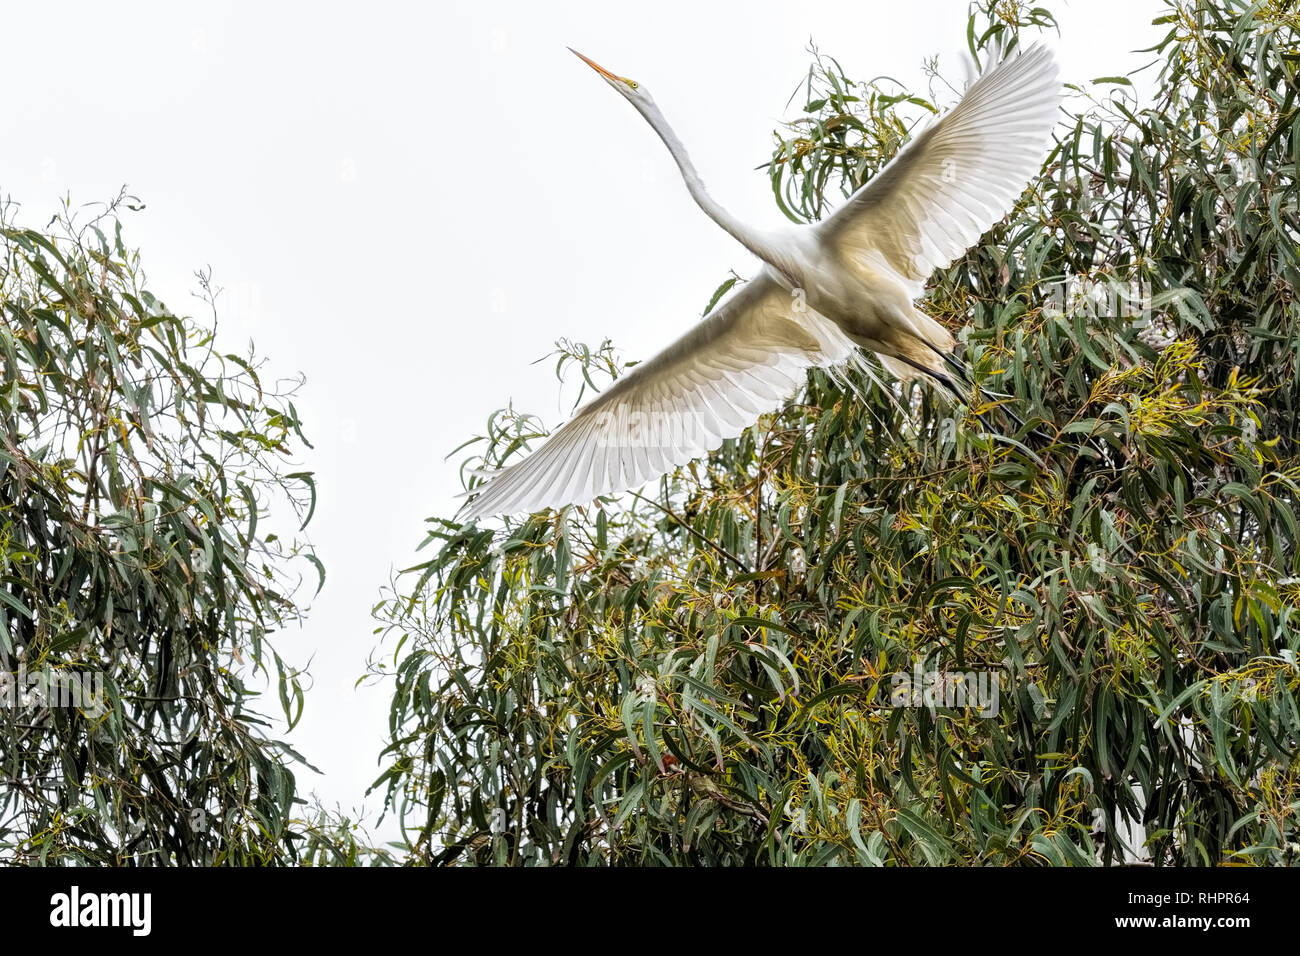 The Great Egret (Ardea alba) nests in large colonies. This bird belonged to a group living in a Eucalyptus tree. Stock Photo